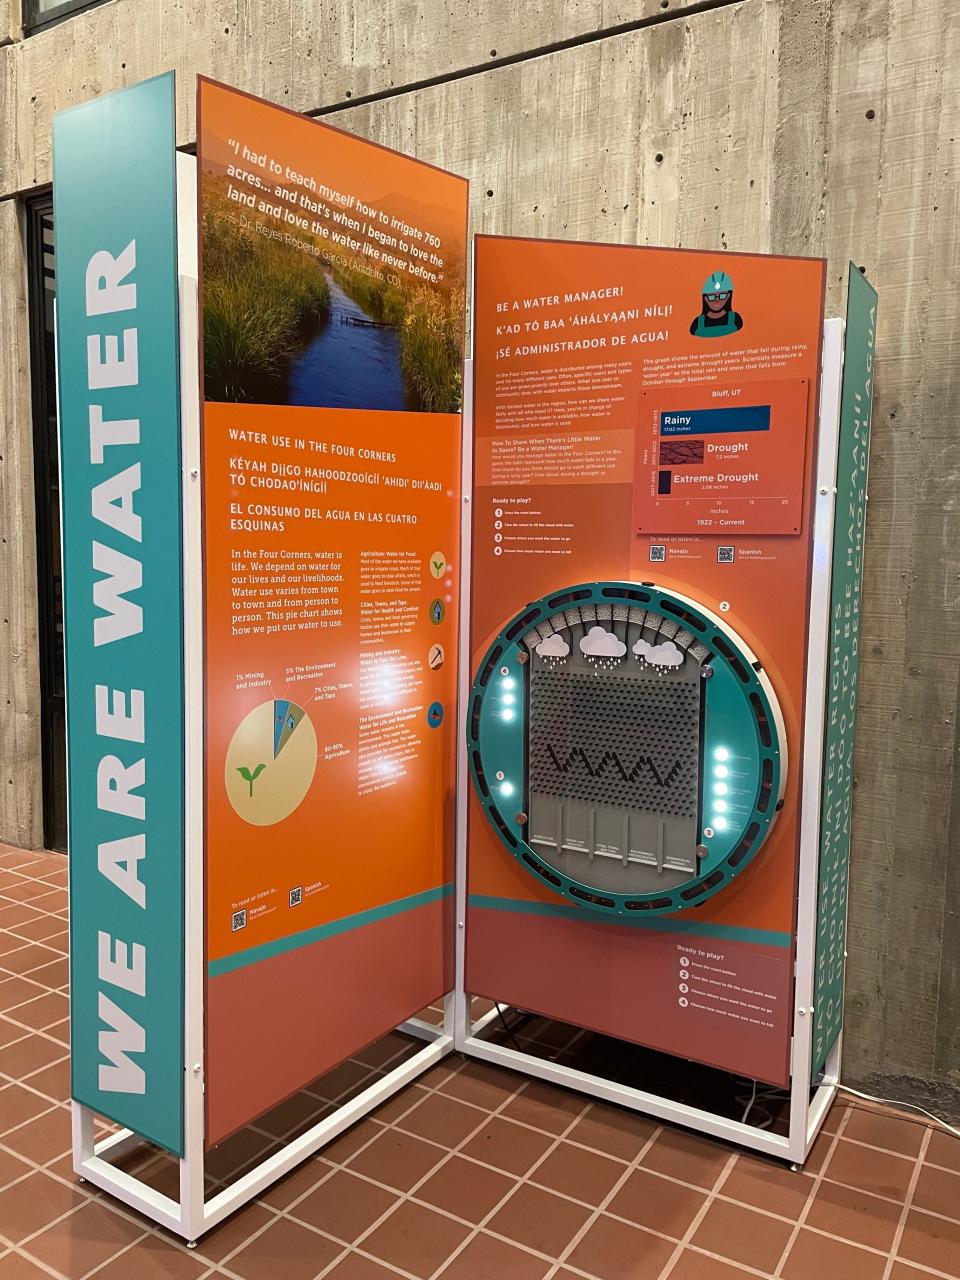 A water use plinko game is part of the "We Are Water" exhibition. Visitors can choose how they want water to be used and how much they want it to rain, and learn how decisions impact how much water is available for different types of water use.